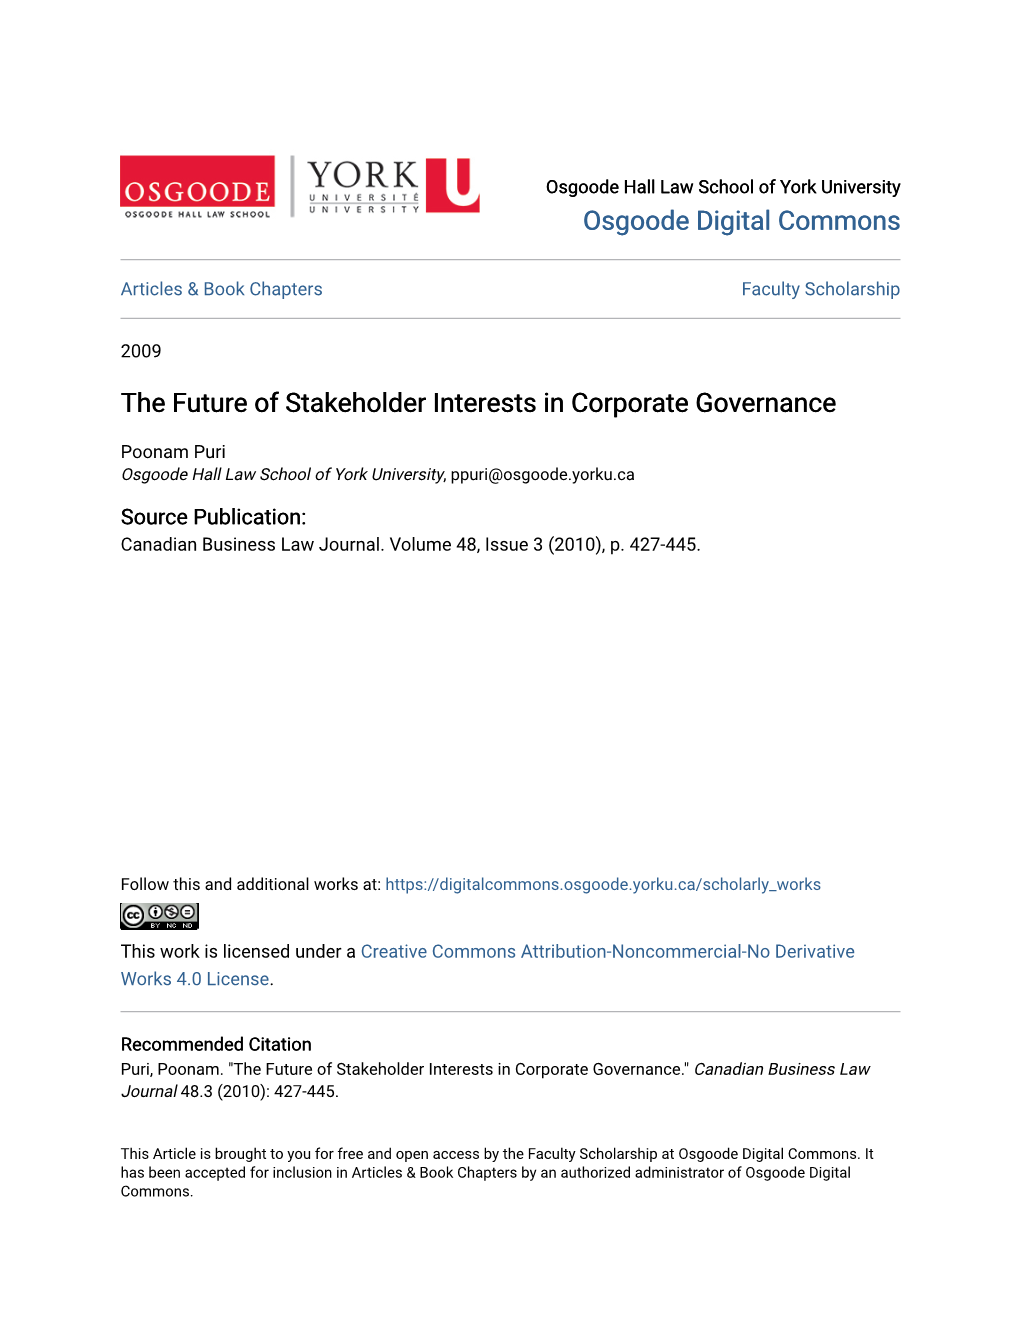 The Future of Stakeholder Interests in Corporate Governance